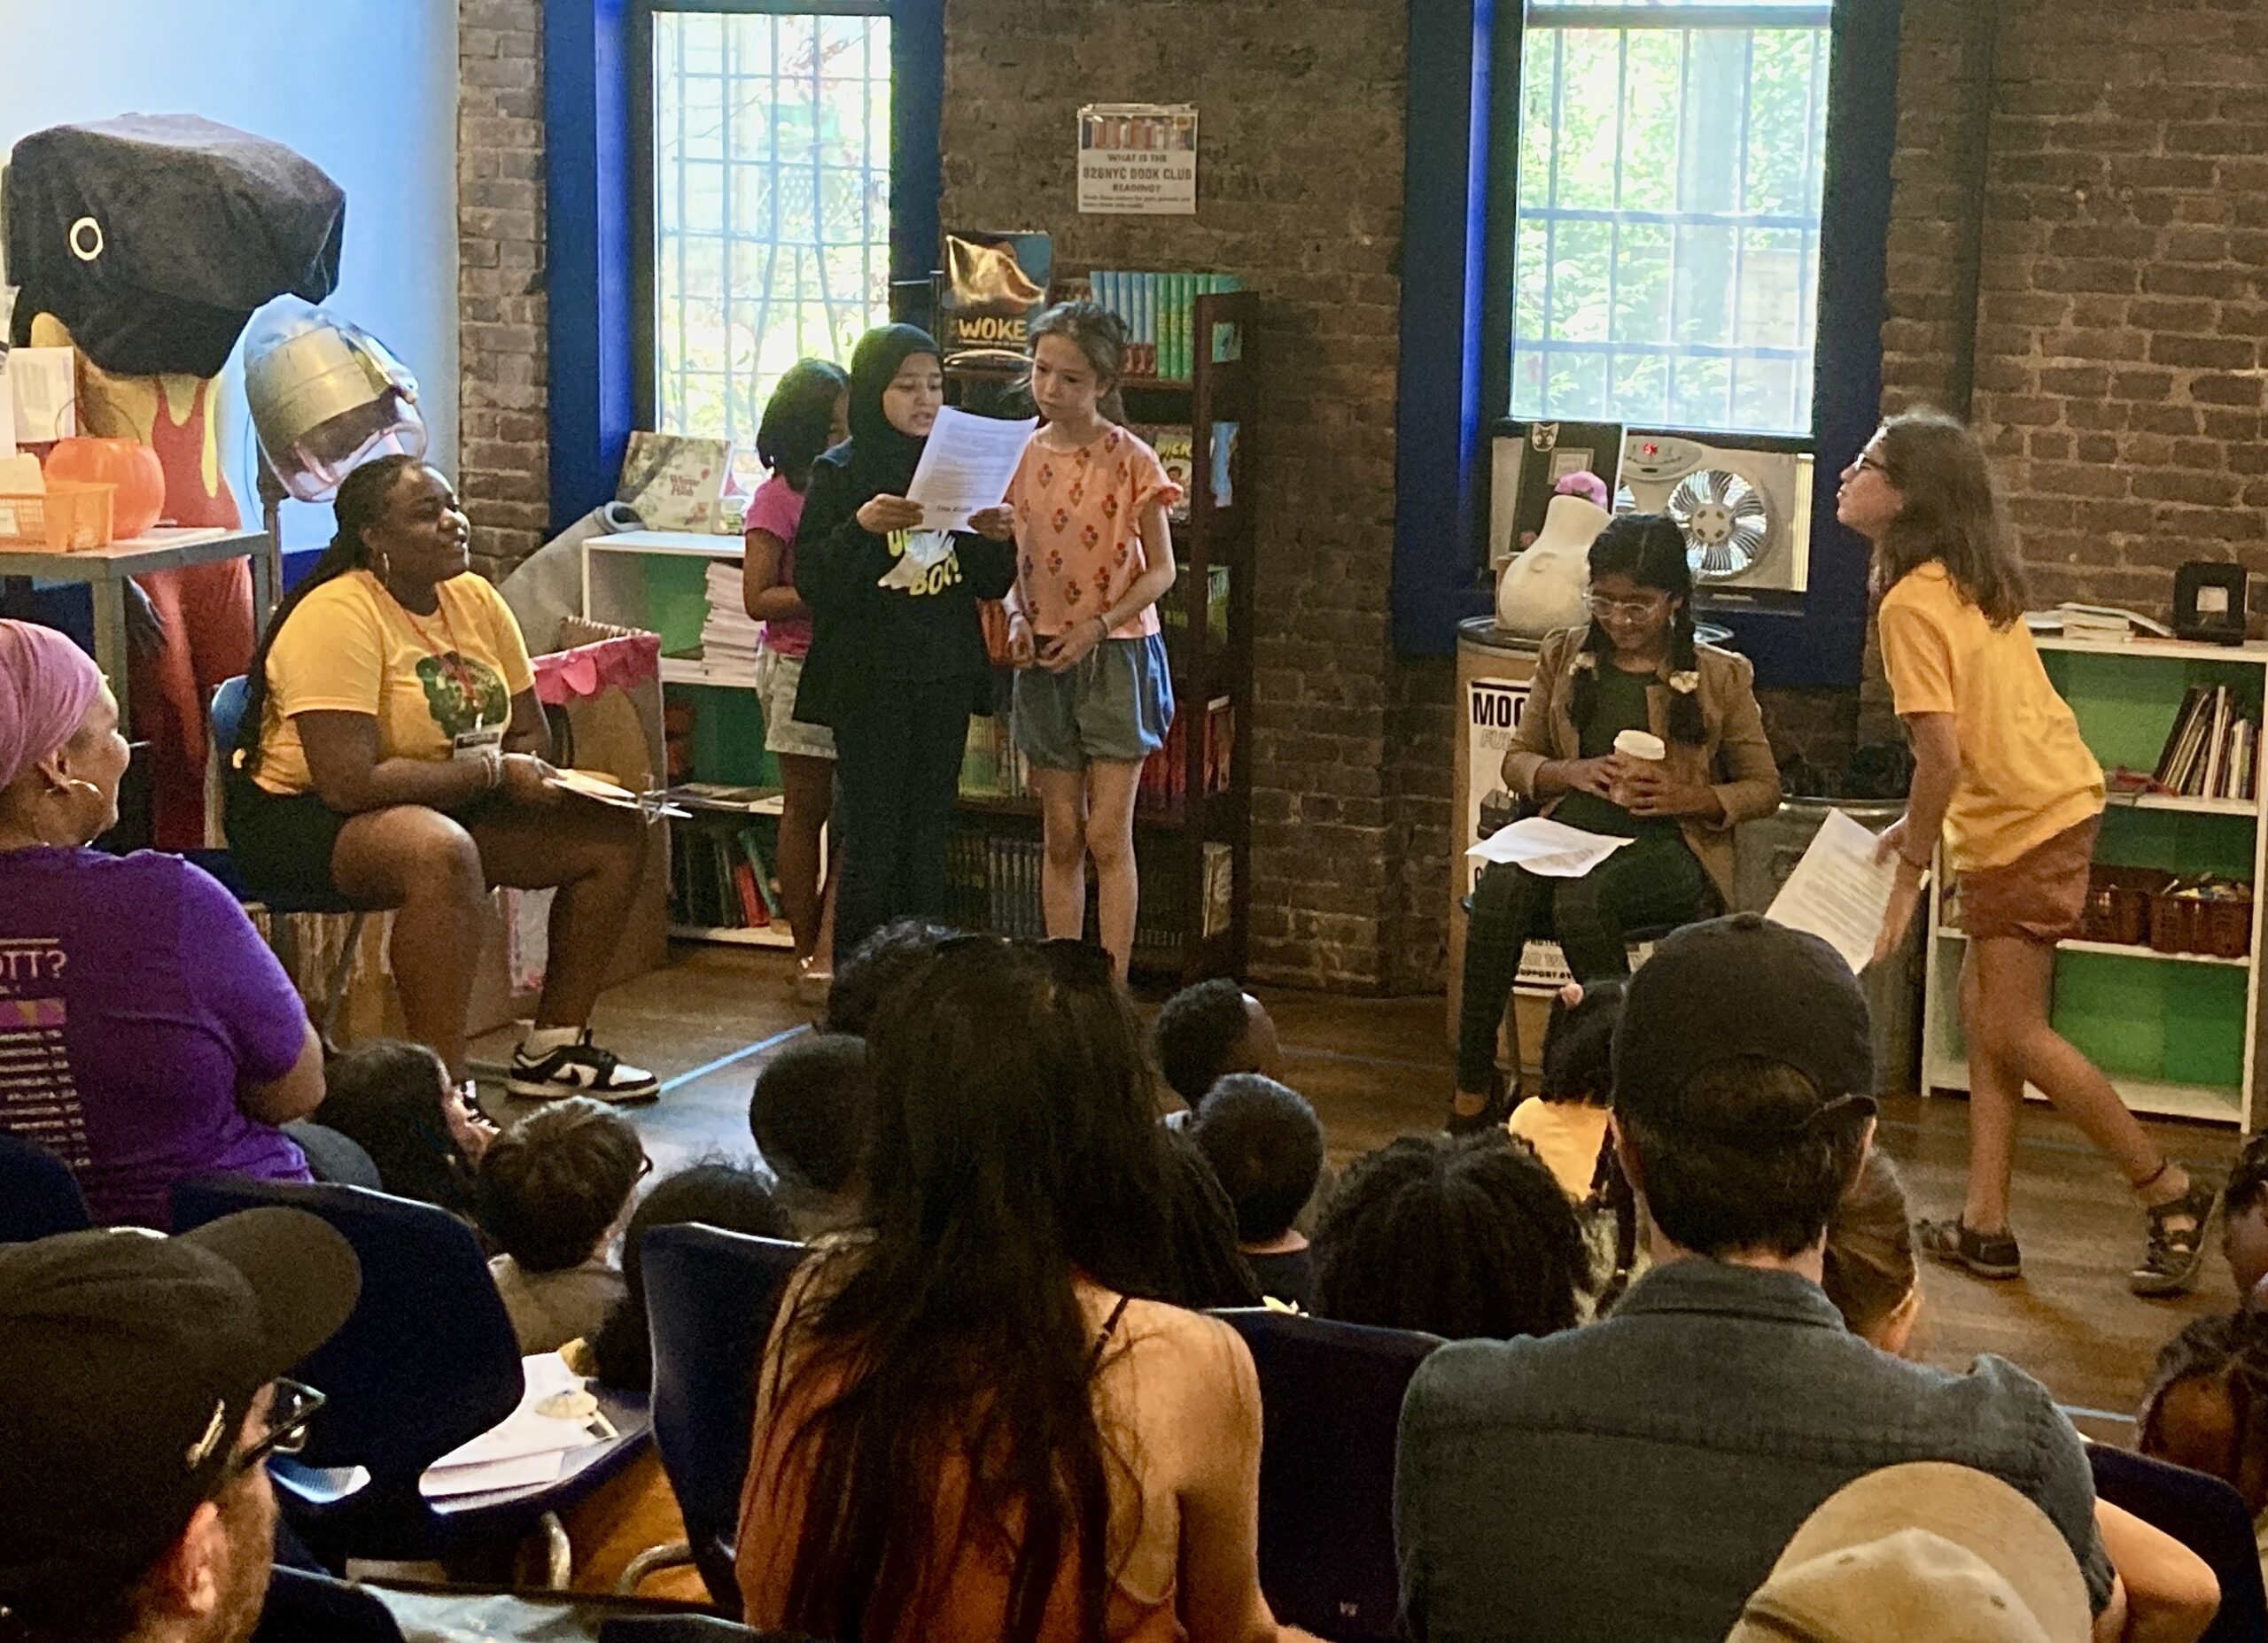 Students in the summer theater camp performing their original plays.